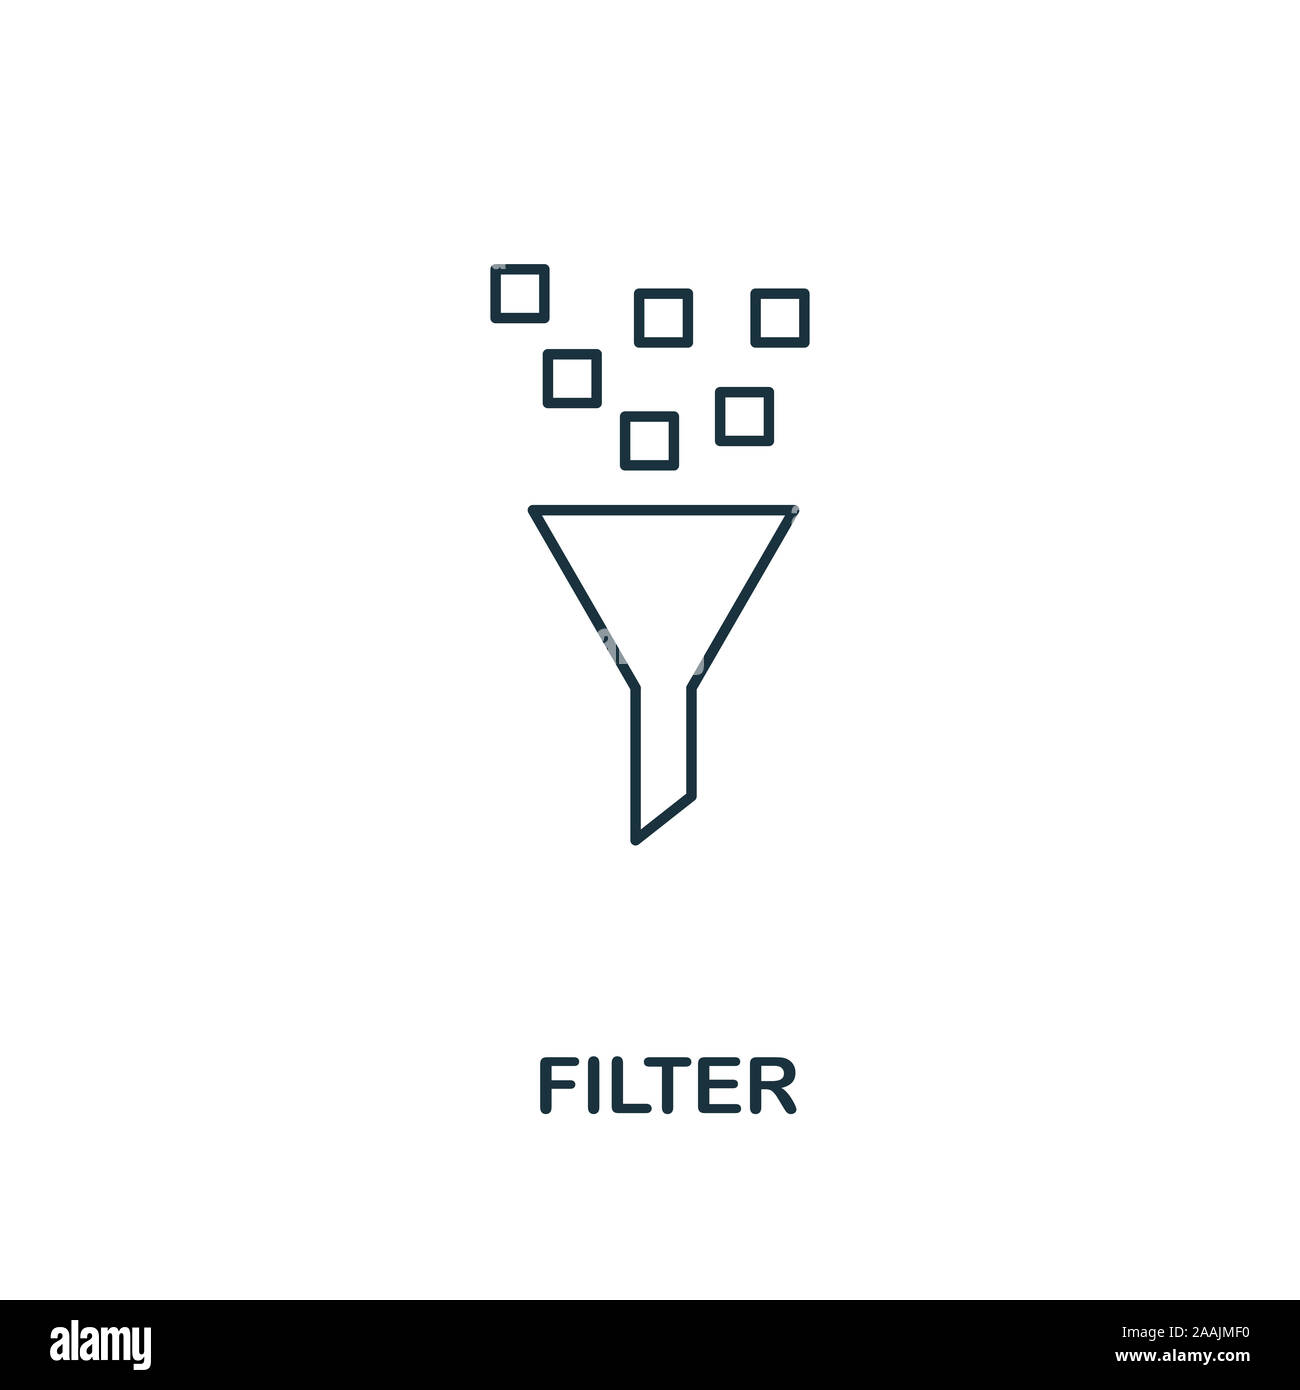 Filter outline icon. Thin line style from big data icons collection. Pixel perfect simple element filter icon for web design, apps, software, print Stock Photo